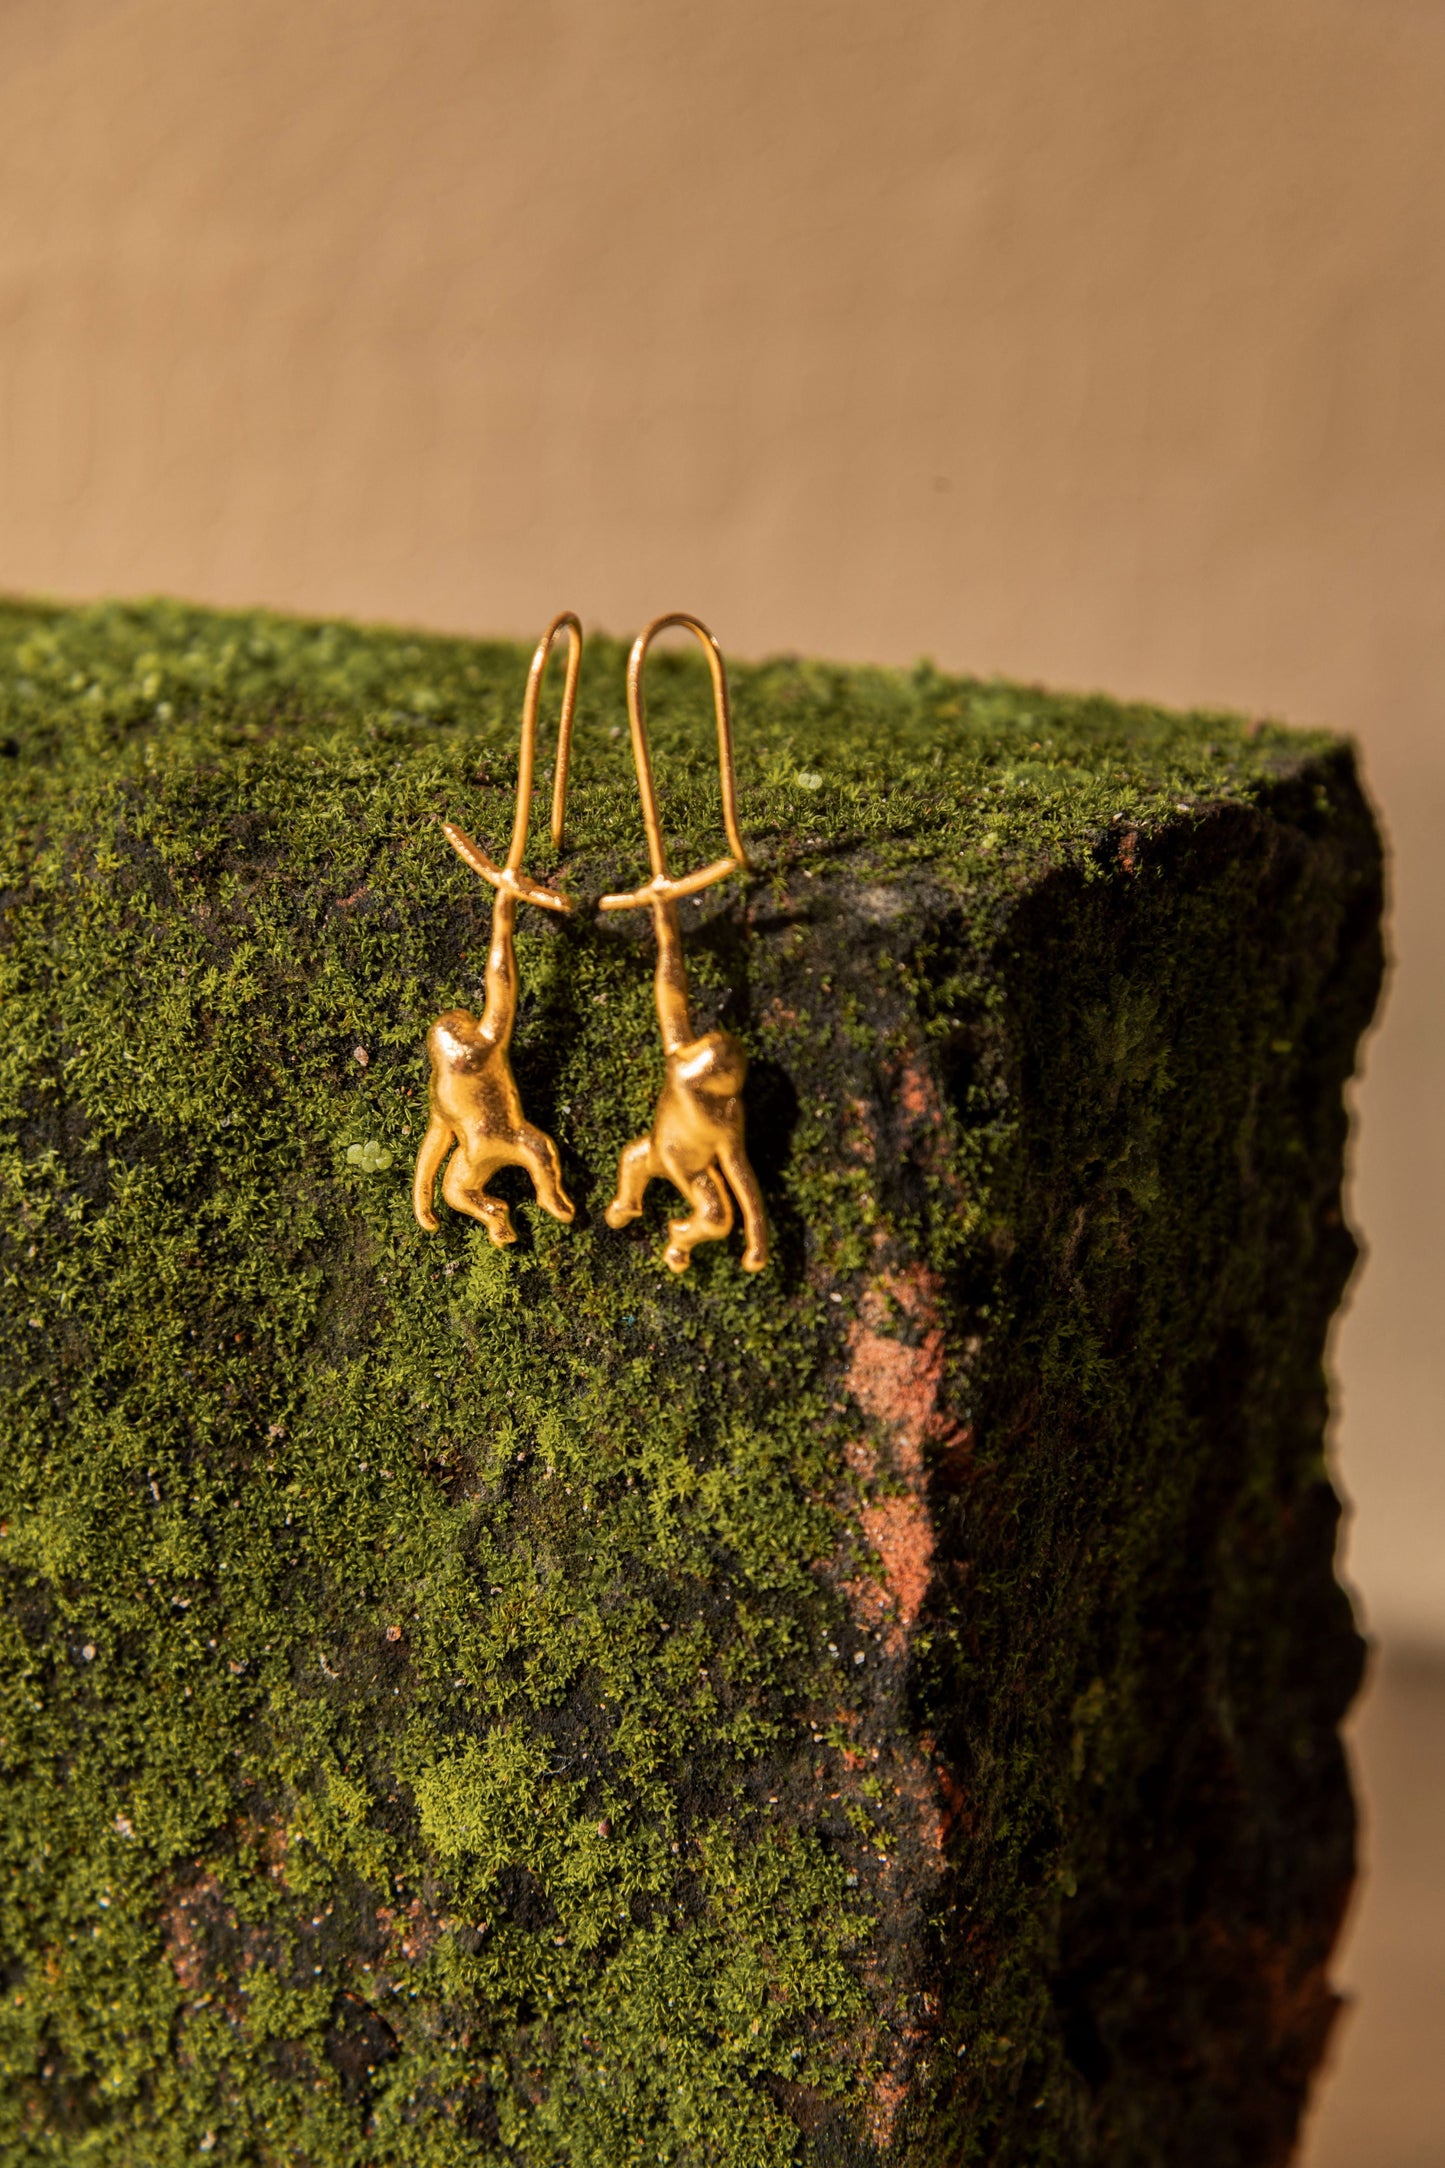 Frrilla Free gorillas Earrings at Kamakhyaa by Amalgam By Aishwarya. This item is Brass, Earrings, Fashion Jewellery, Free Size, Gold, Gold Plated, jewelry, Less than $50, Long Earrings, Natural, Yellow